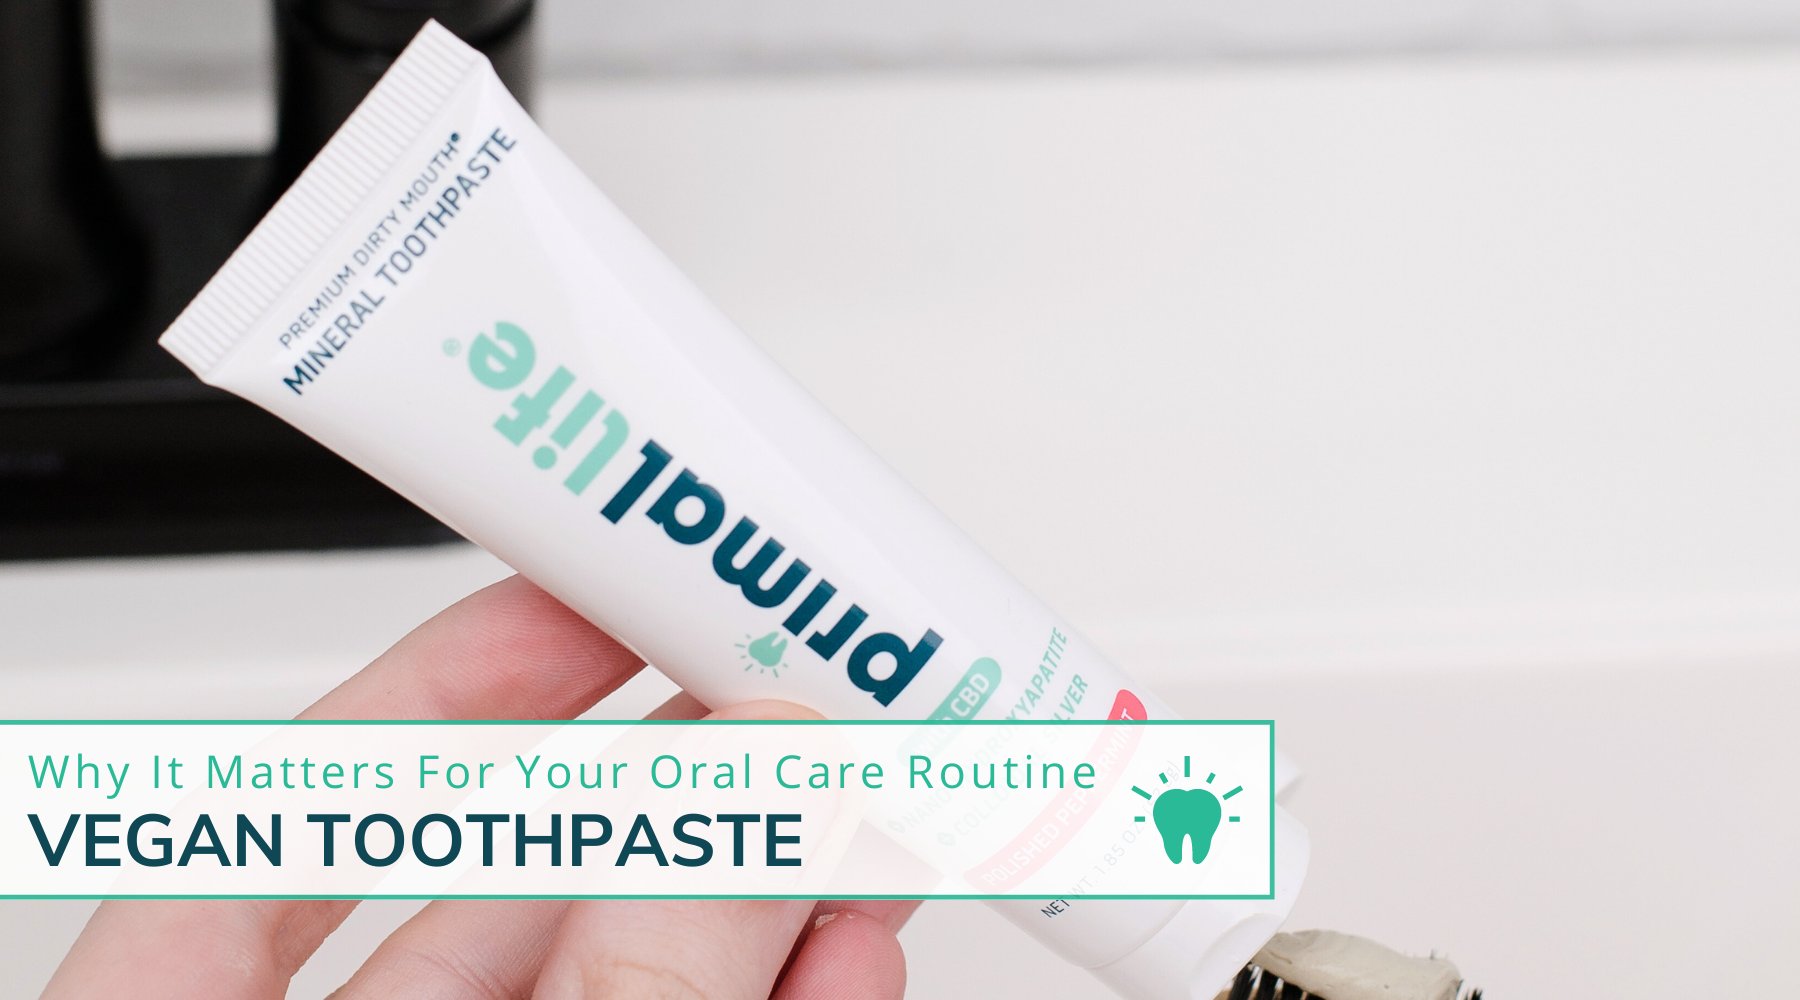 Vegan Toothpaste: Why It Matters for Your Oral Care Routine